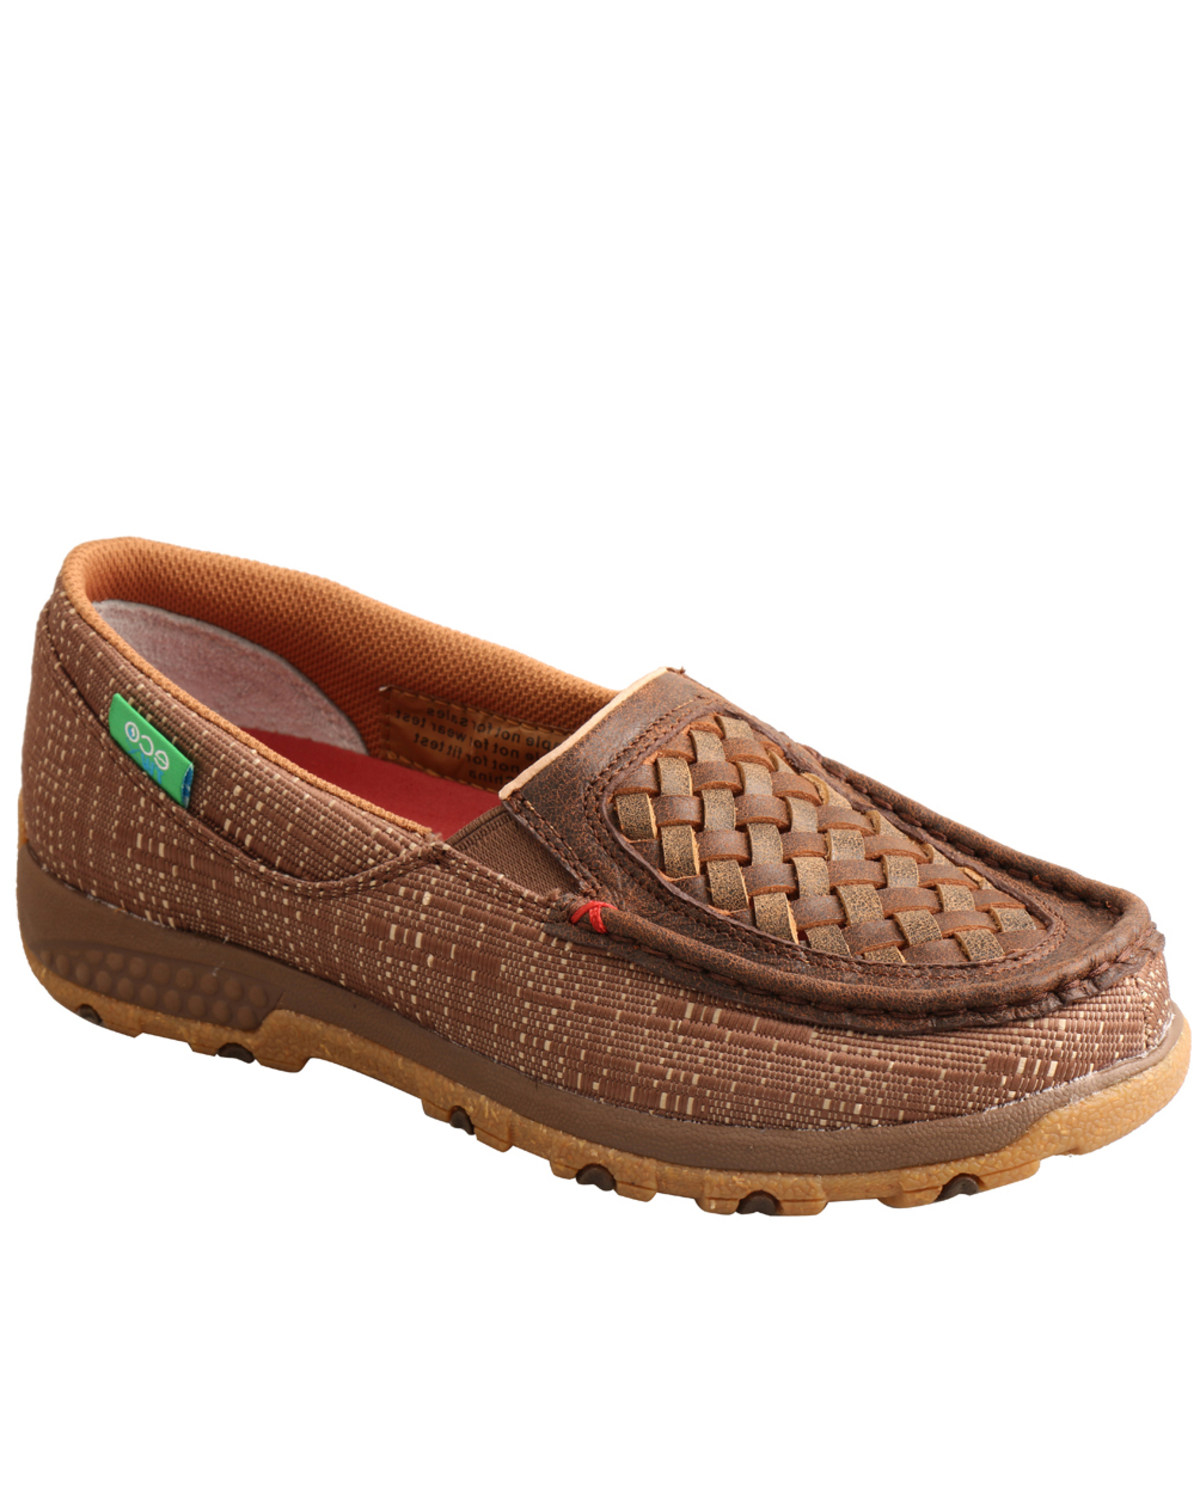 Twisted X Women's Woven CellStretch Driving Shoes - Moc Toe